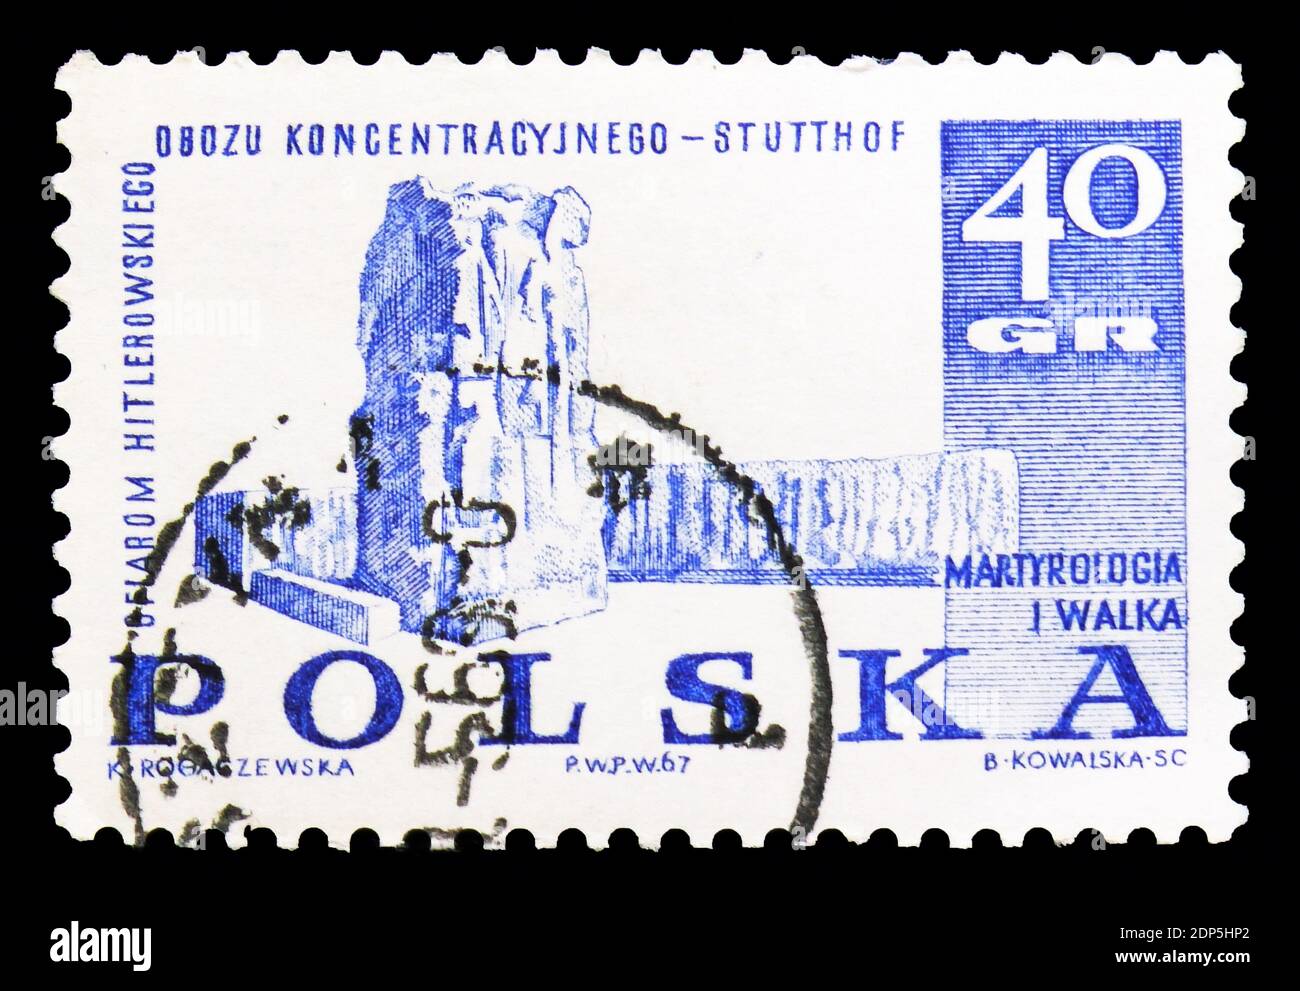 MOSCOW, RUSSIA - SEPTEMBER 15, 2018: A stamp printed in Poland shows Monument in Stutthof, Struggle and Martyrdom of the Polish People, 1939-45 serie, Stock Photo